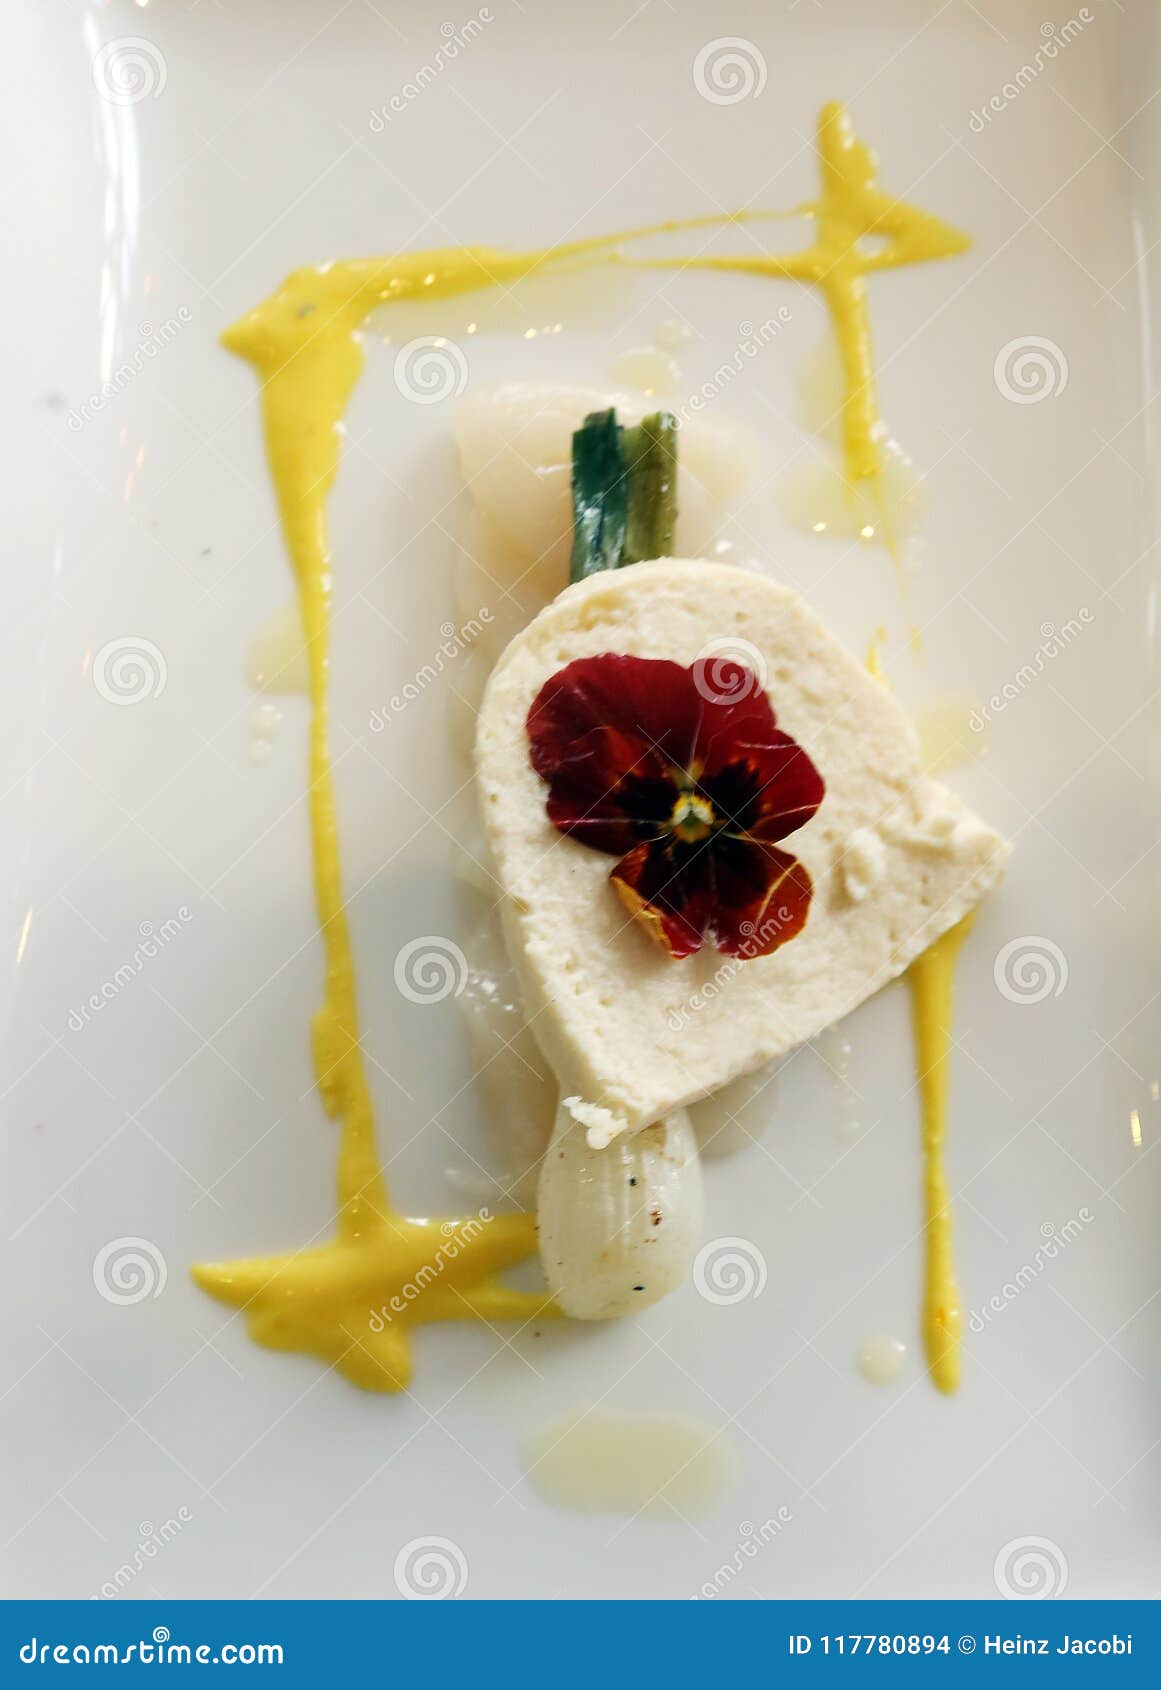 sturgeon parfait and scallop carpaccio with young leek, saffron and safflower as a part of the wedding menu